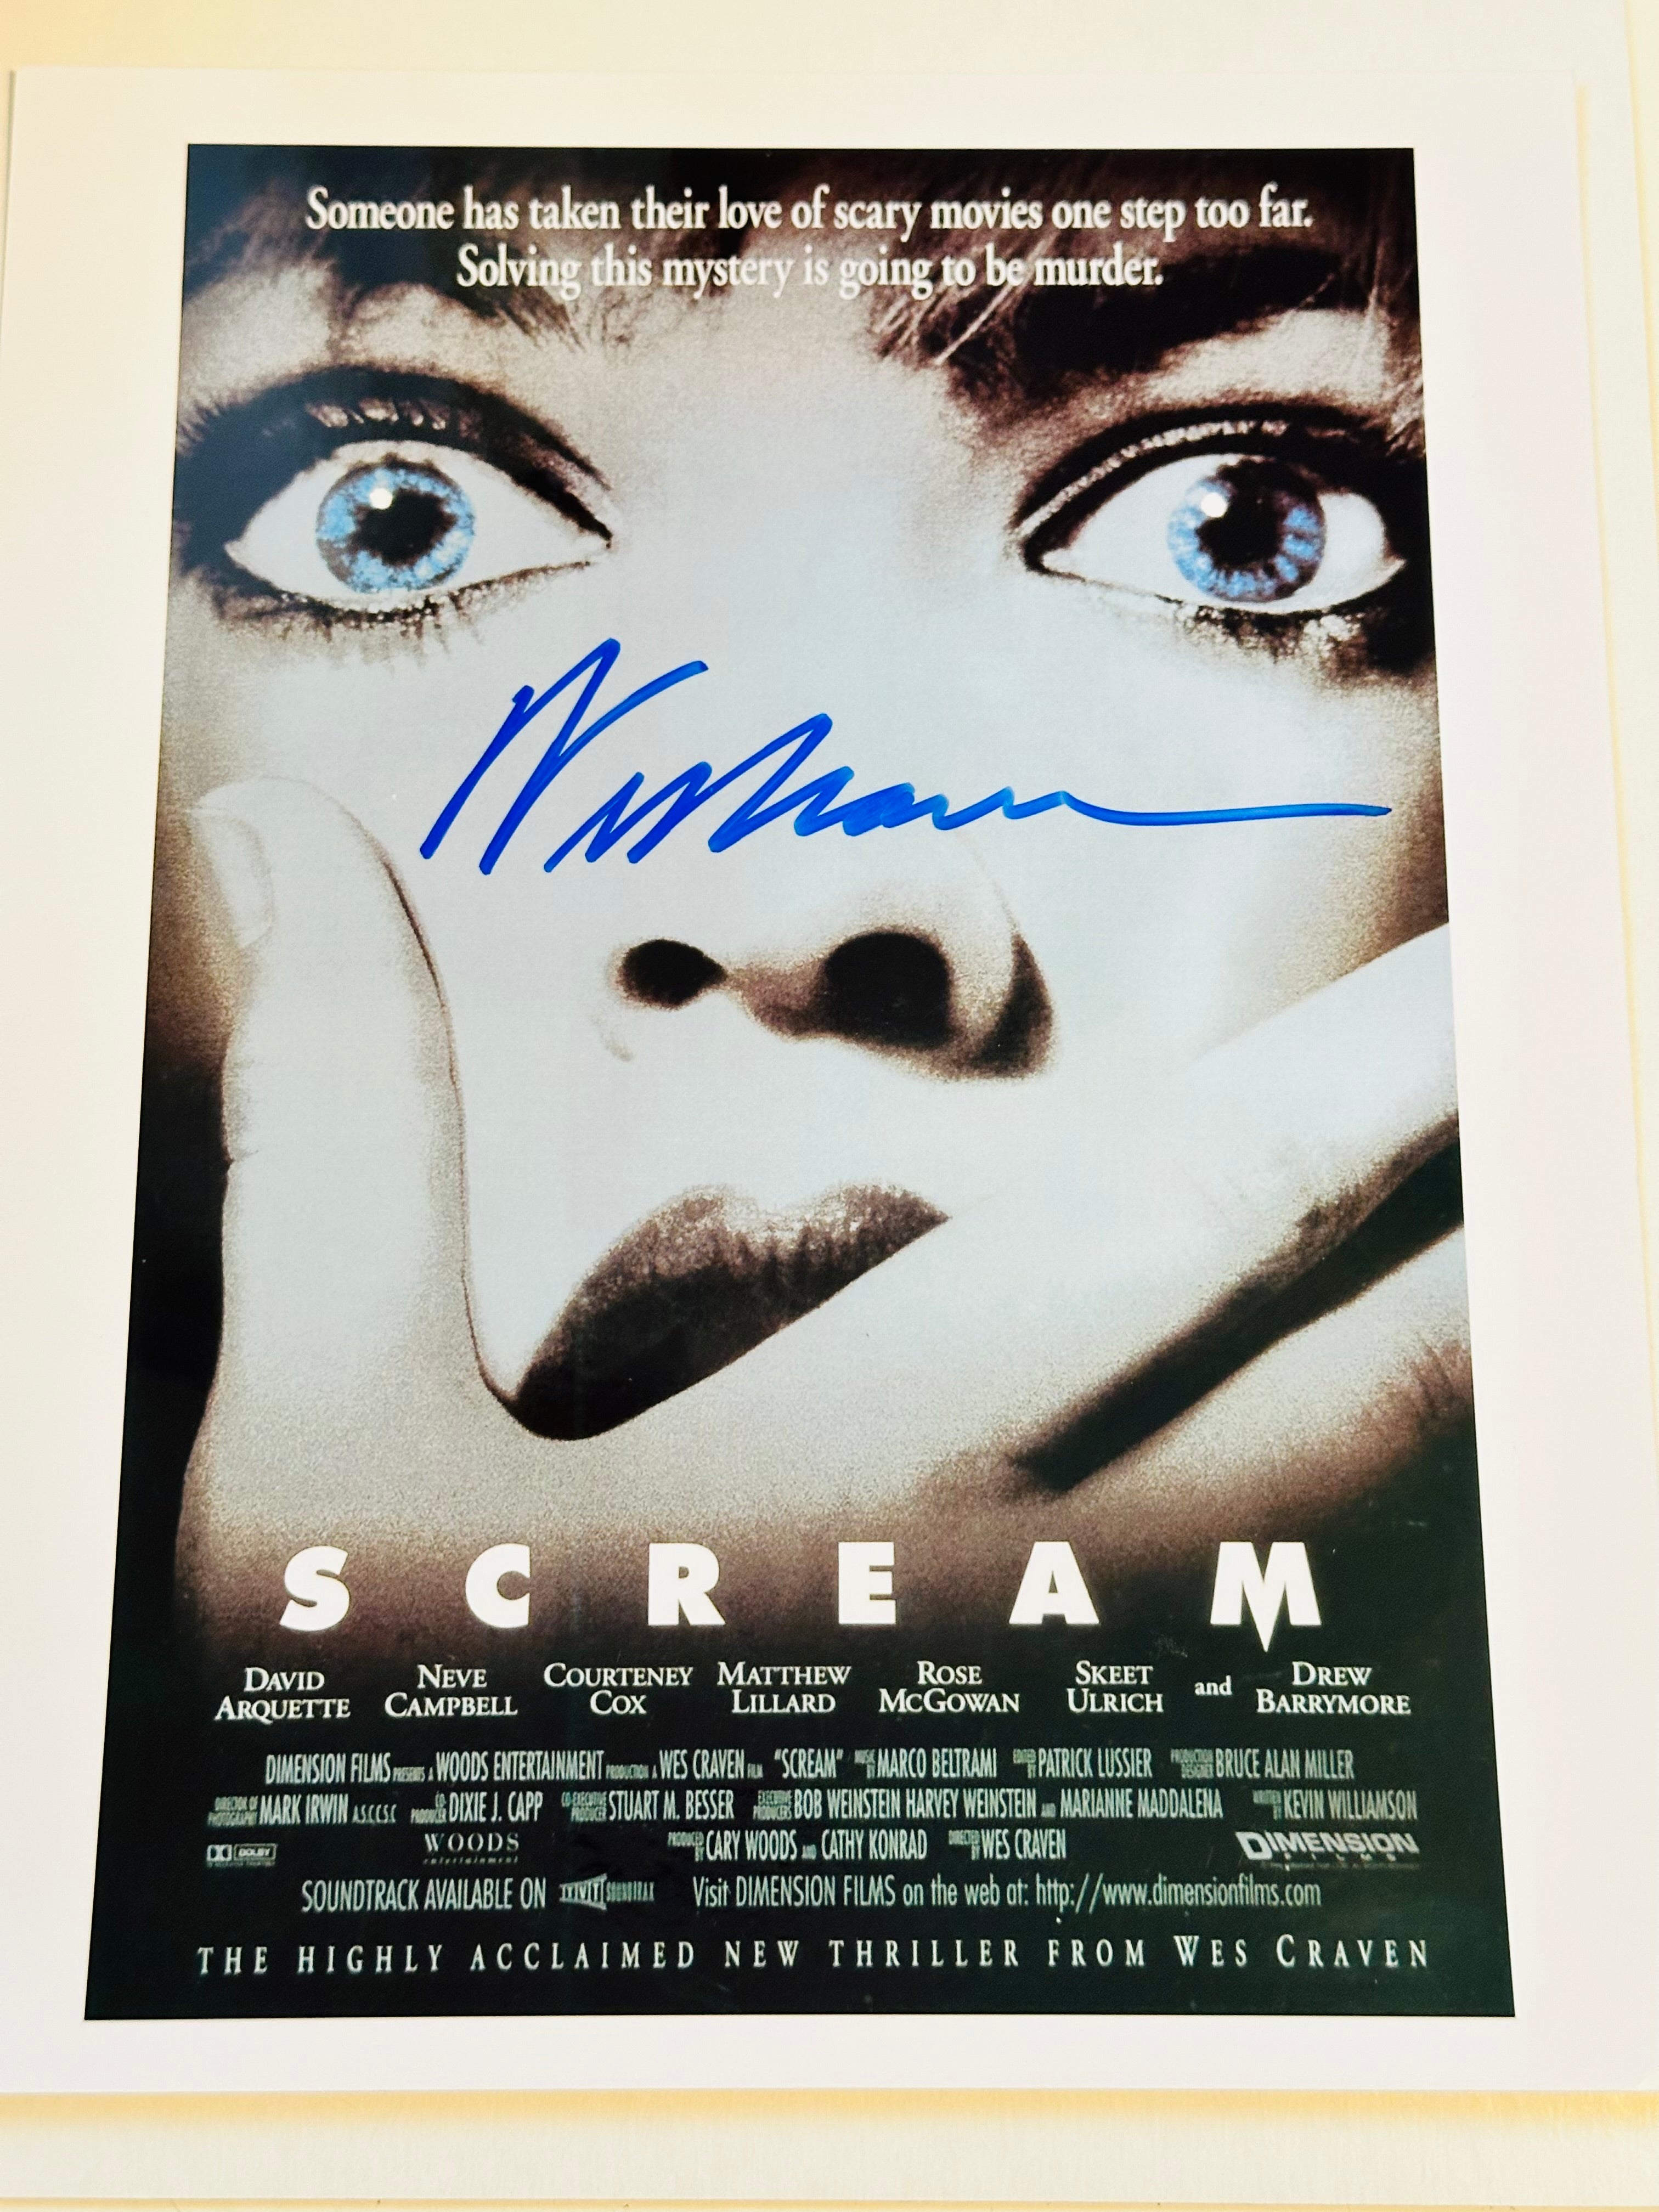 Scream Movie rare Wes Craven signed glossy 8x10 photo certified by Fanexpo with COA and hologram